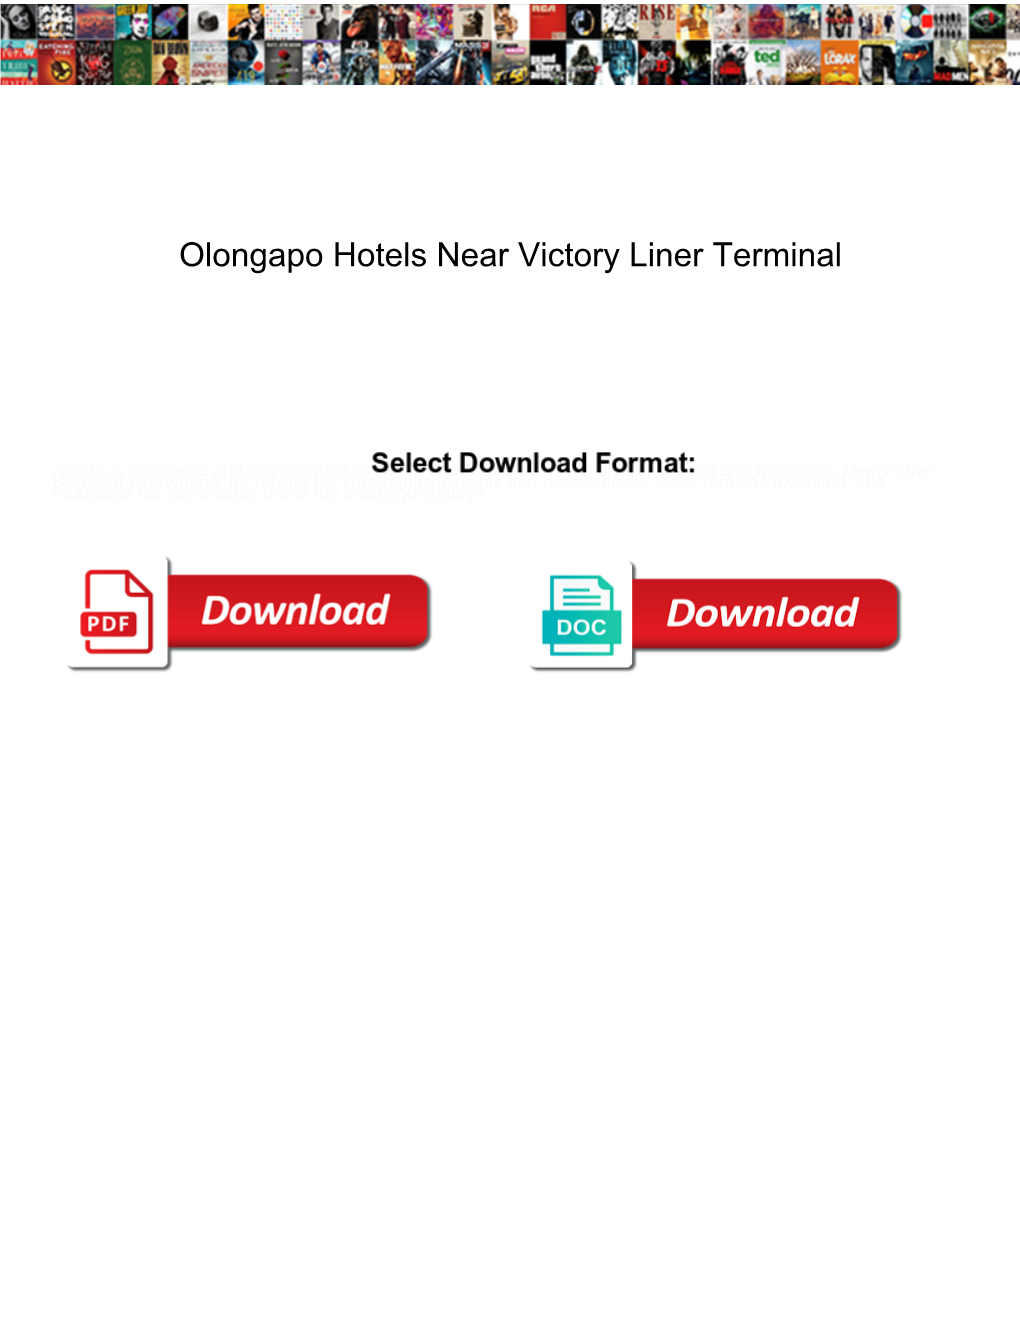 Olongapo Hotels Near Victory Liner Terminal